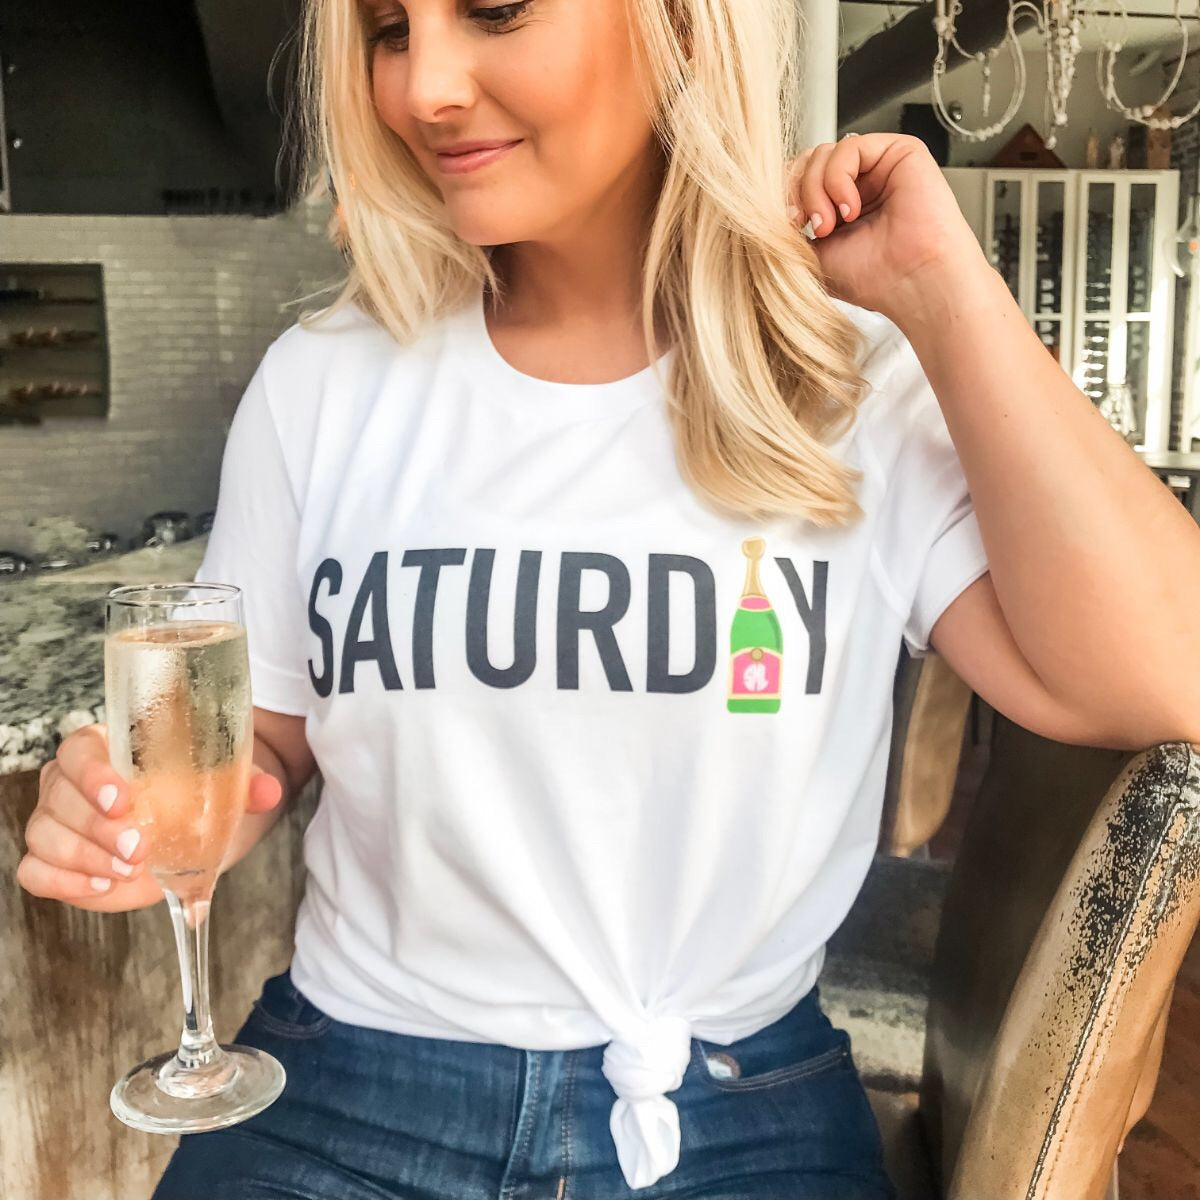 shelby lowery 'Saturday' Monogram t-shirt woth champagne